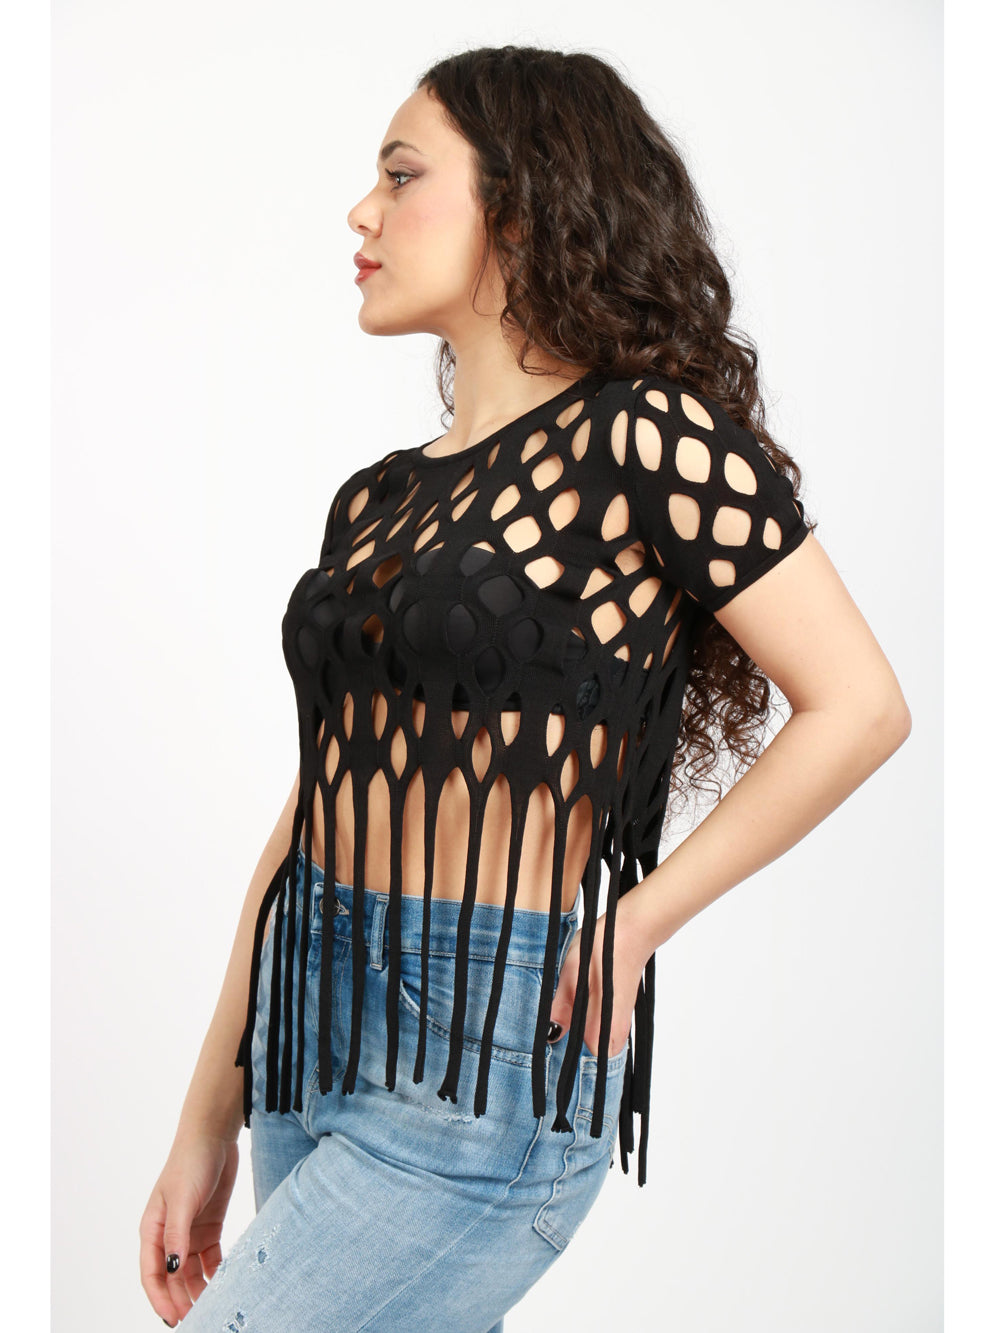 Hamlet Round Neck T-Shirt in Black Mesh with Fringes